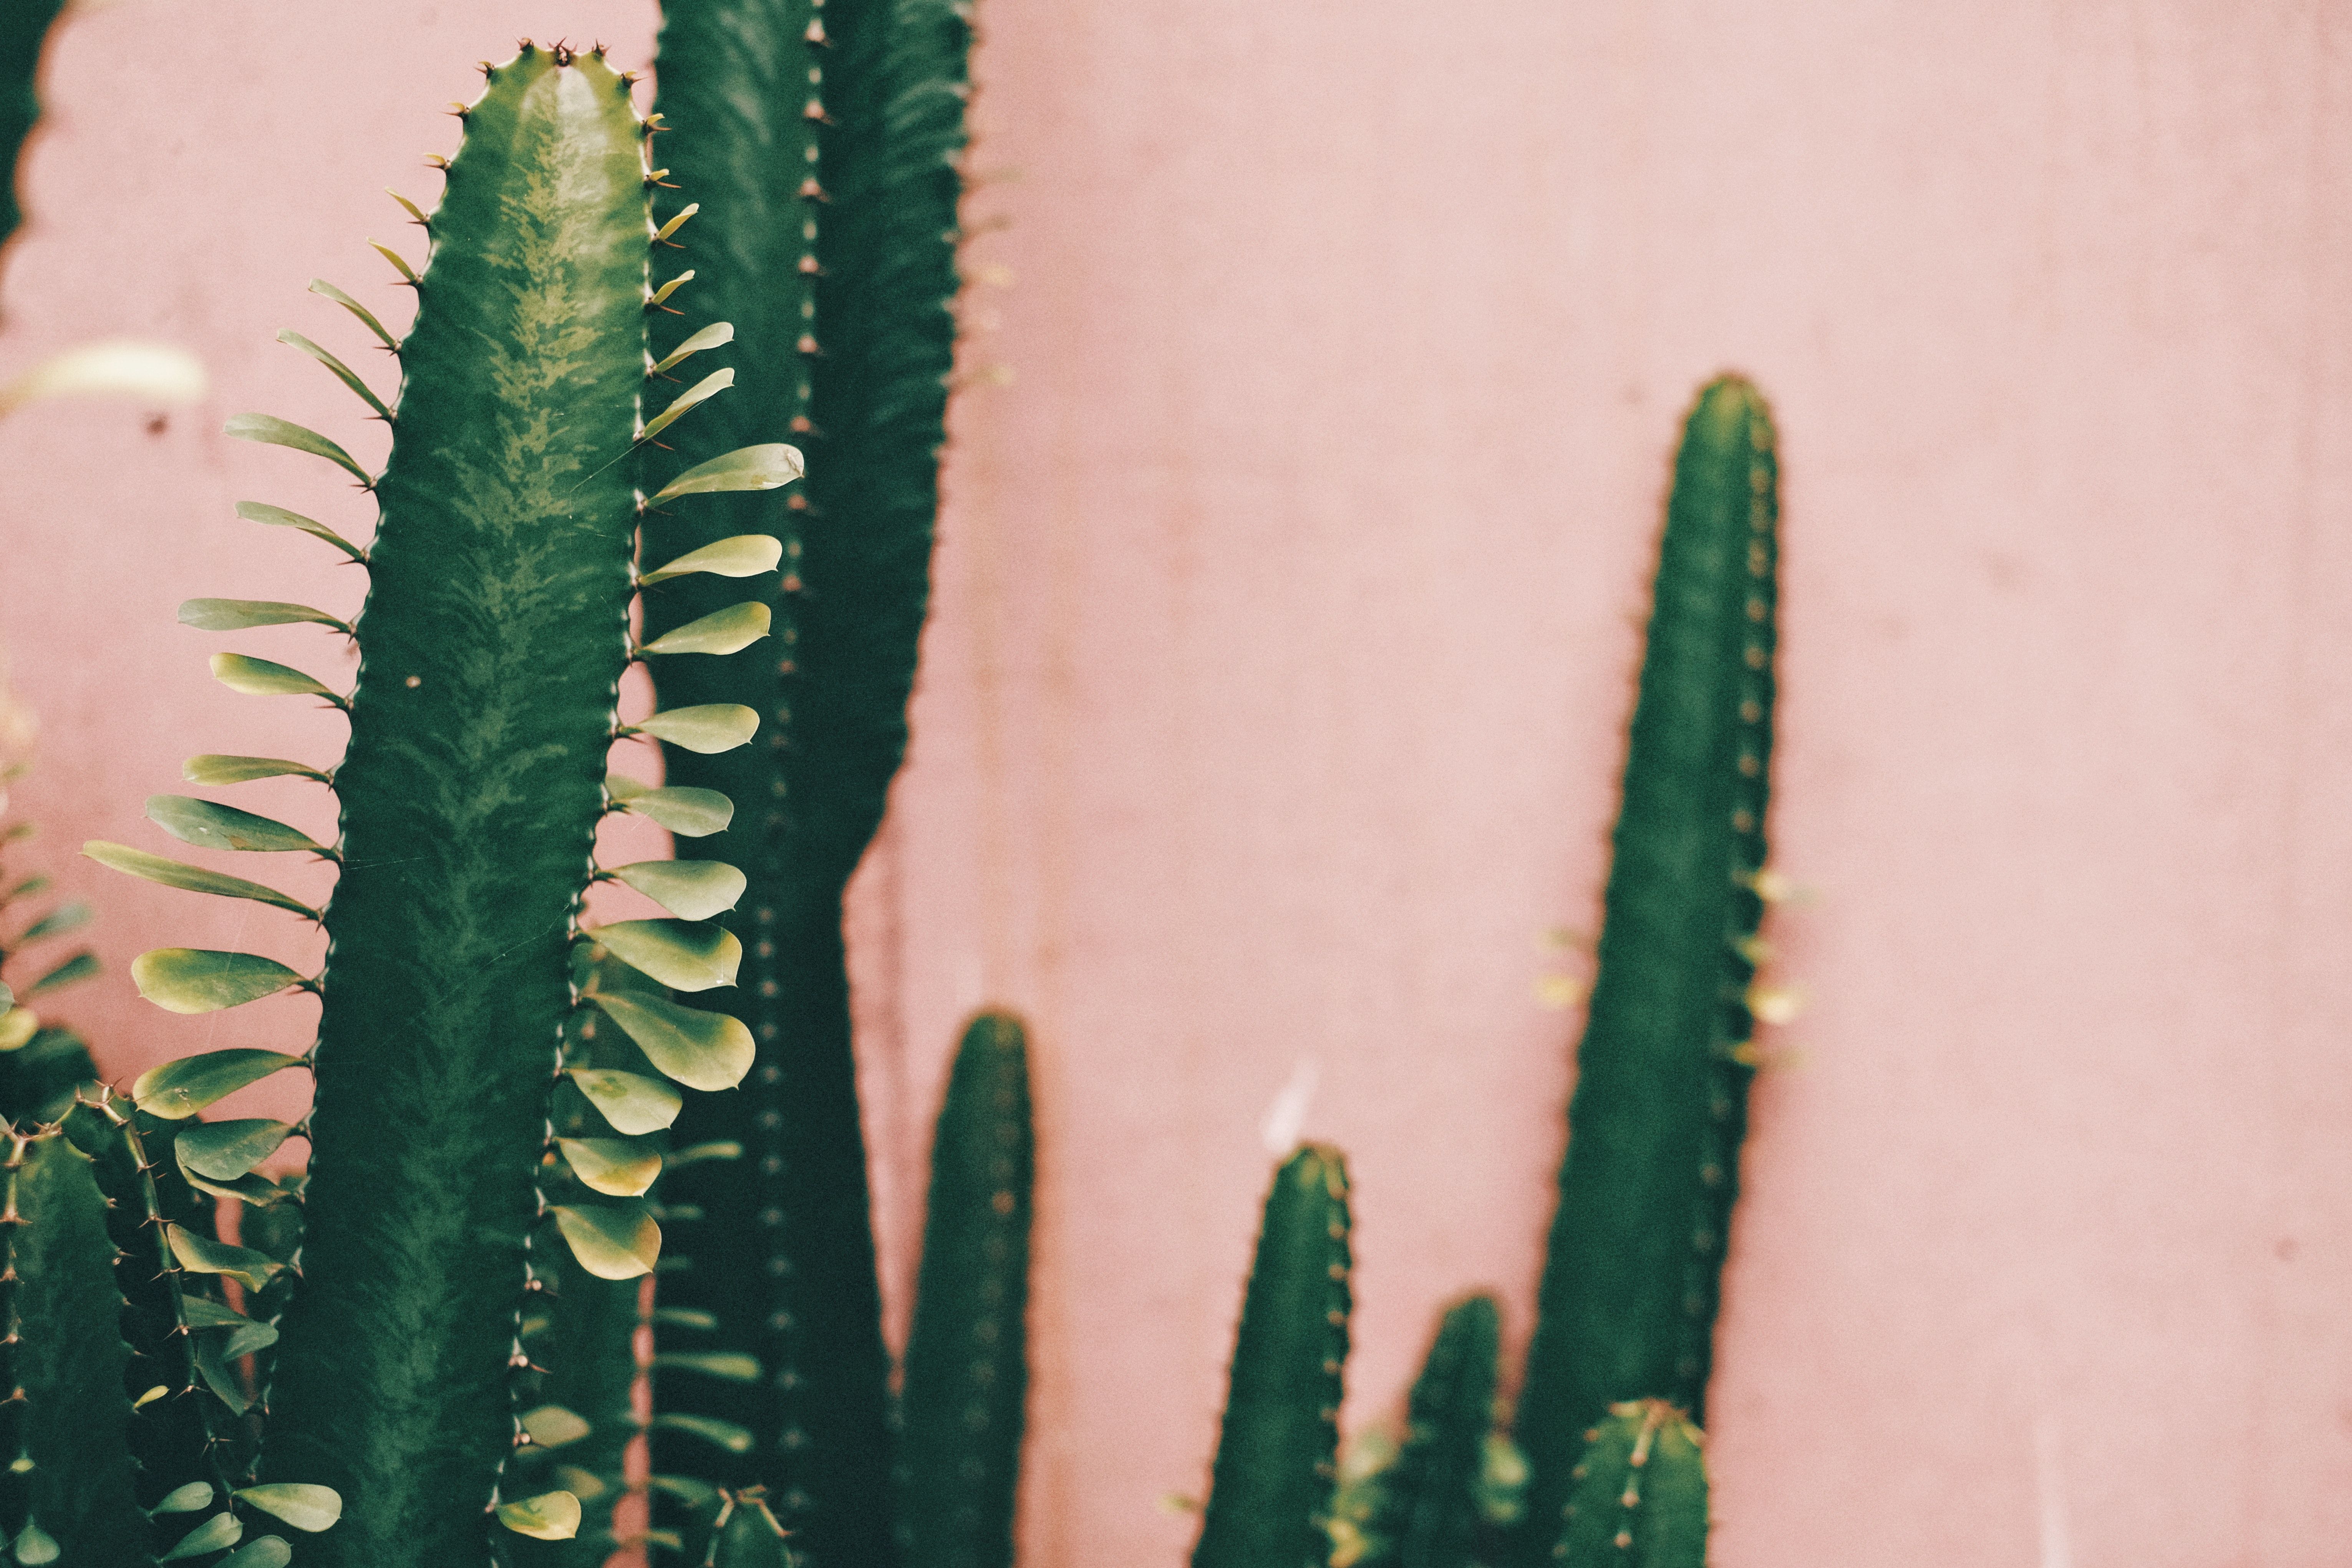 A close up of a cactus in front of a pink wall - Cactus